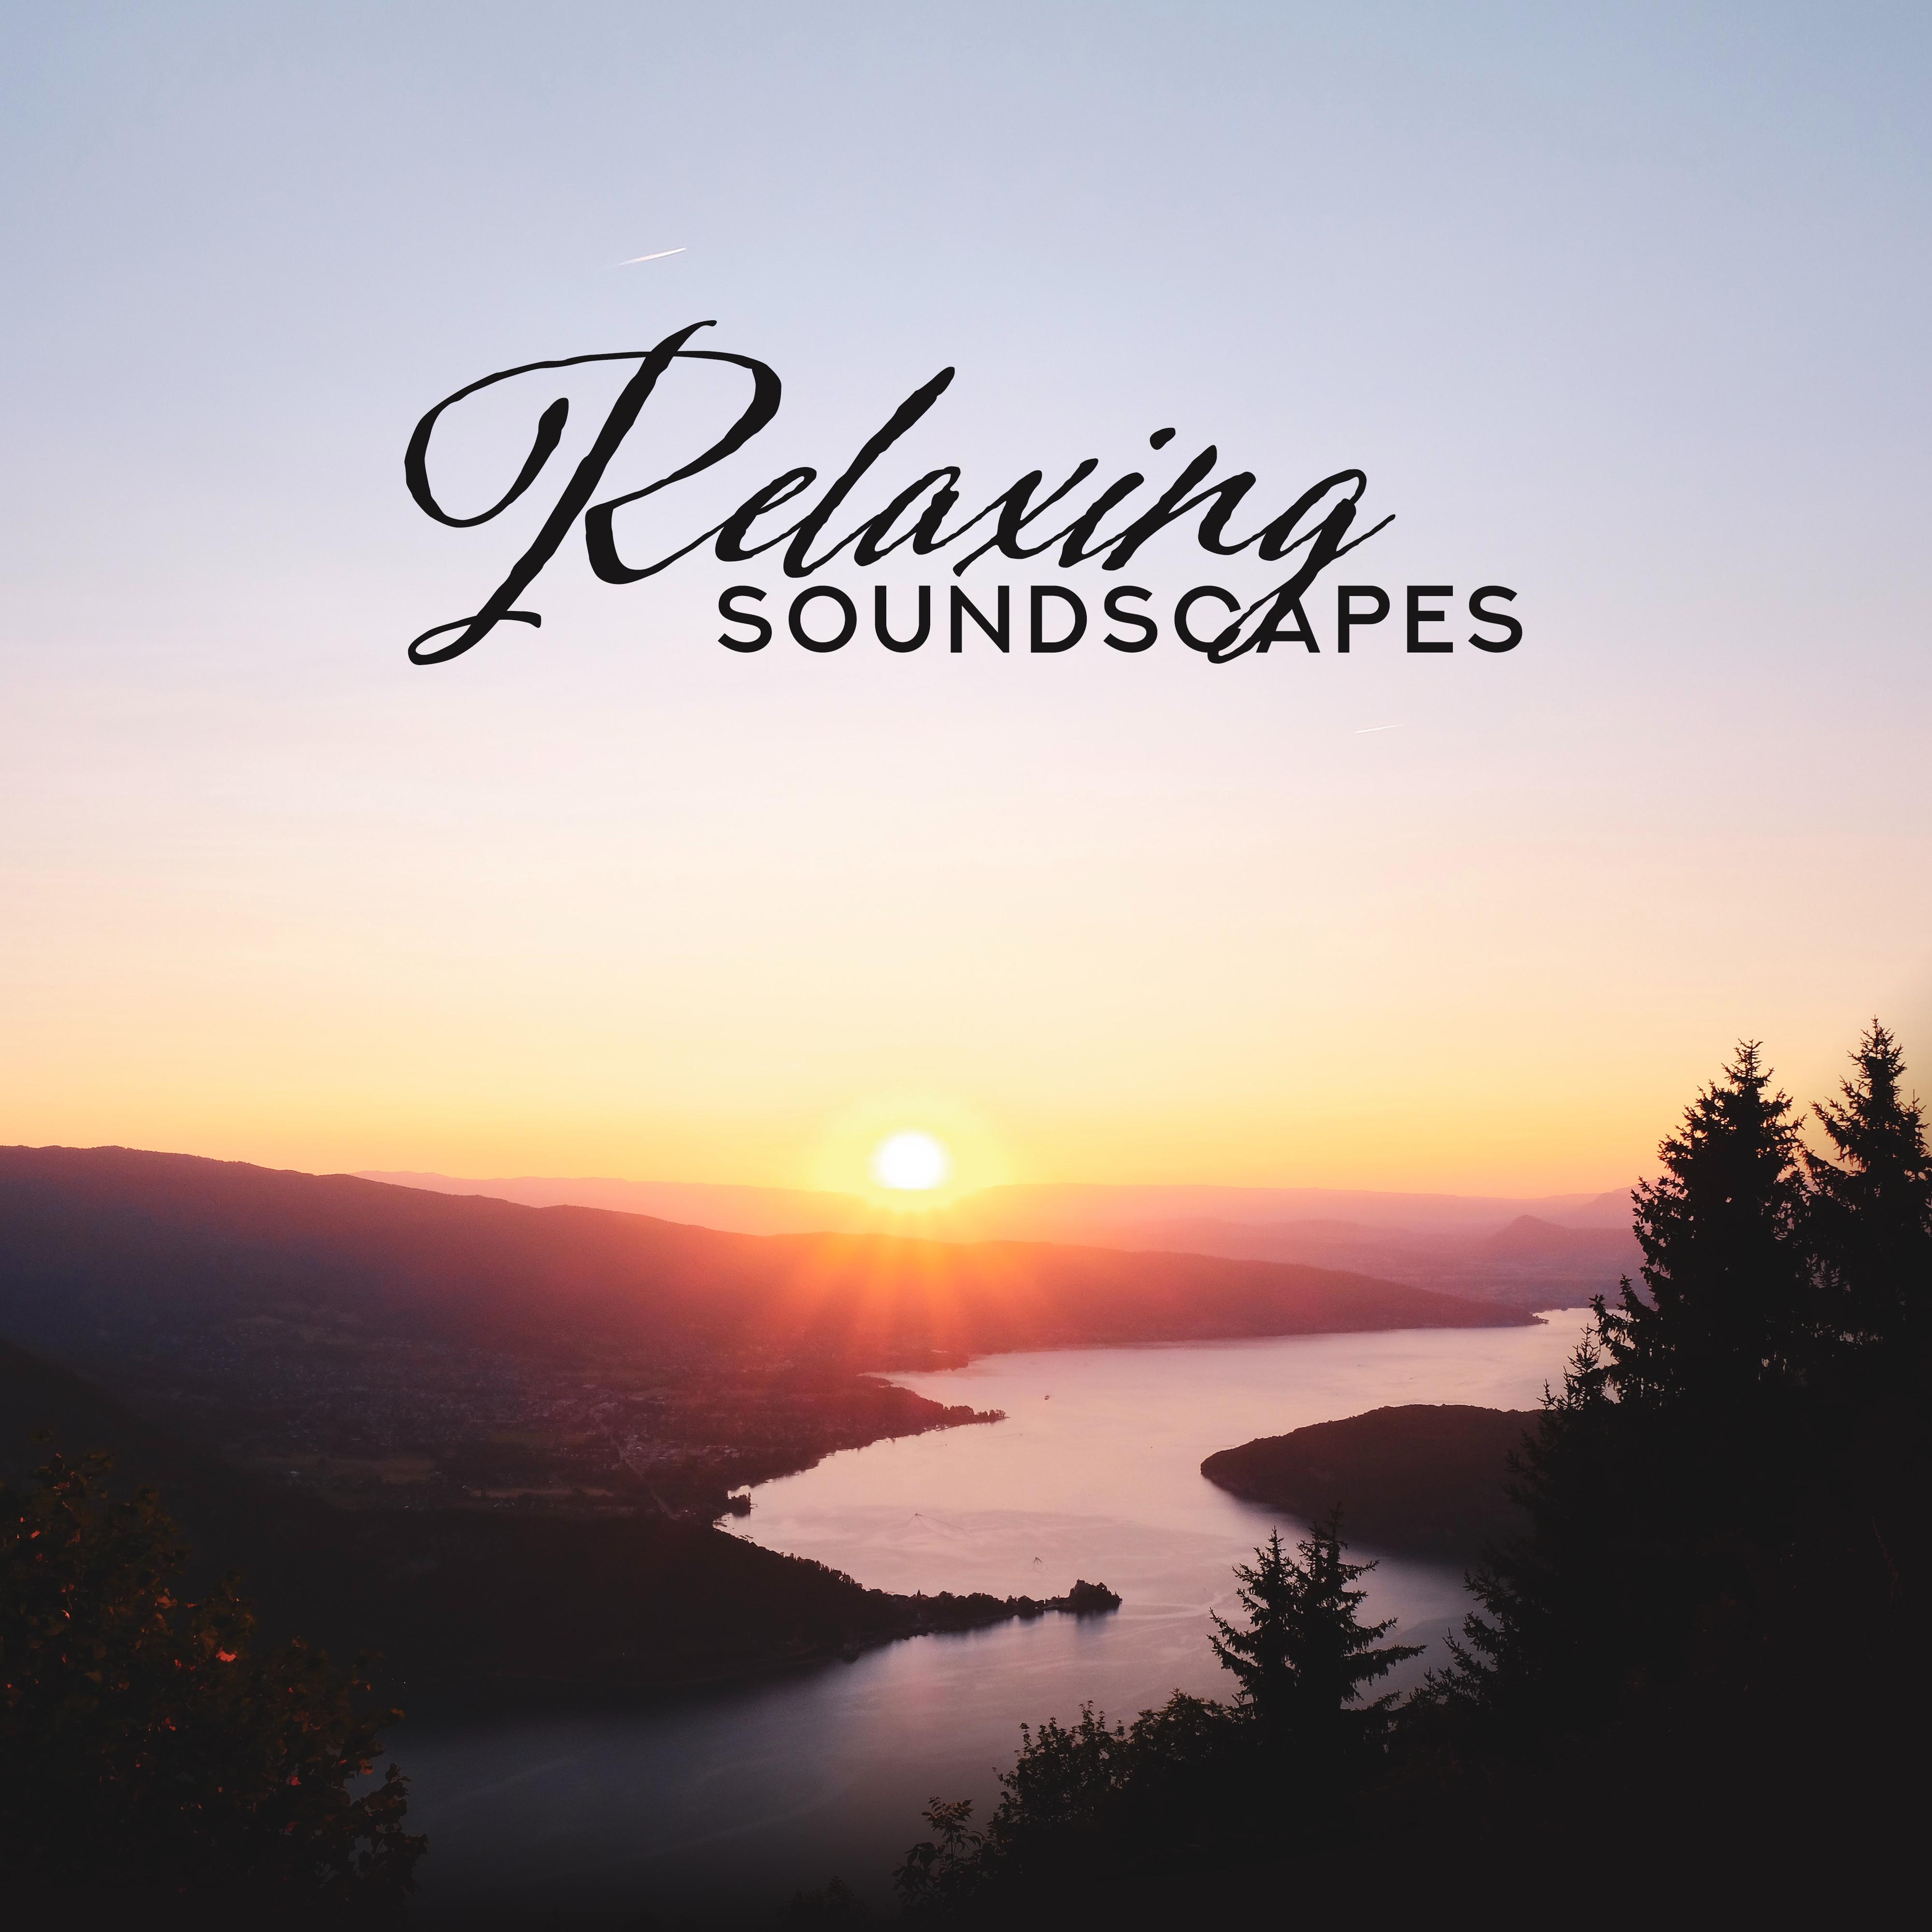 Relaxing Soundscapes: Extremely Relaxing Music of Nature with the Sounds of Water (Ocean and Rain), Calming Ambient Music, Sleep Instrumental Music & Stress Reducing Melodies